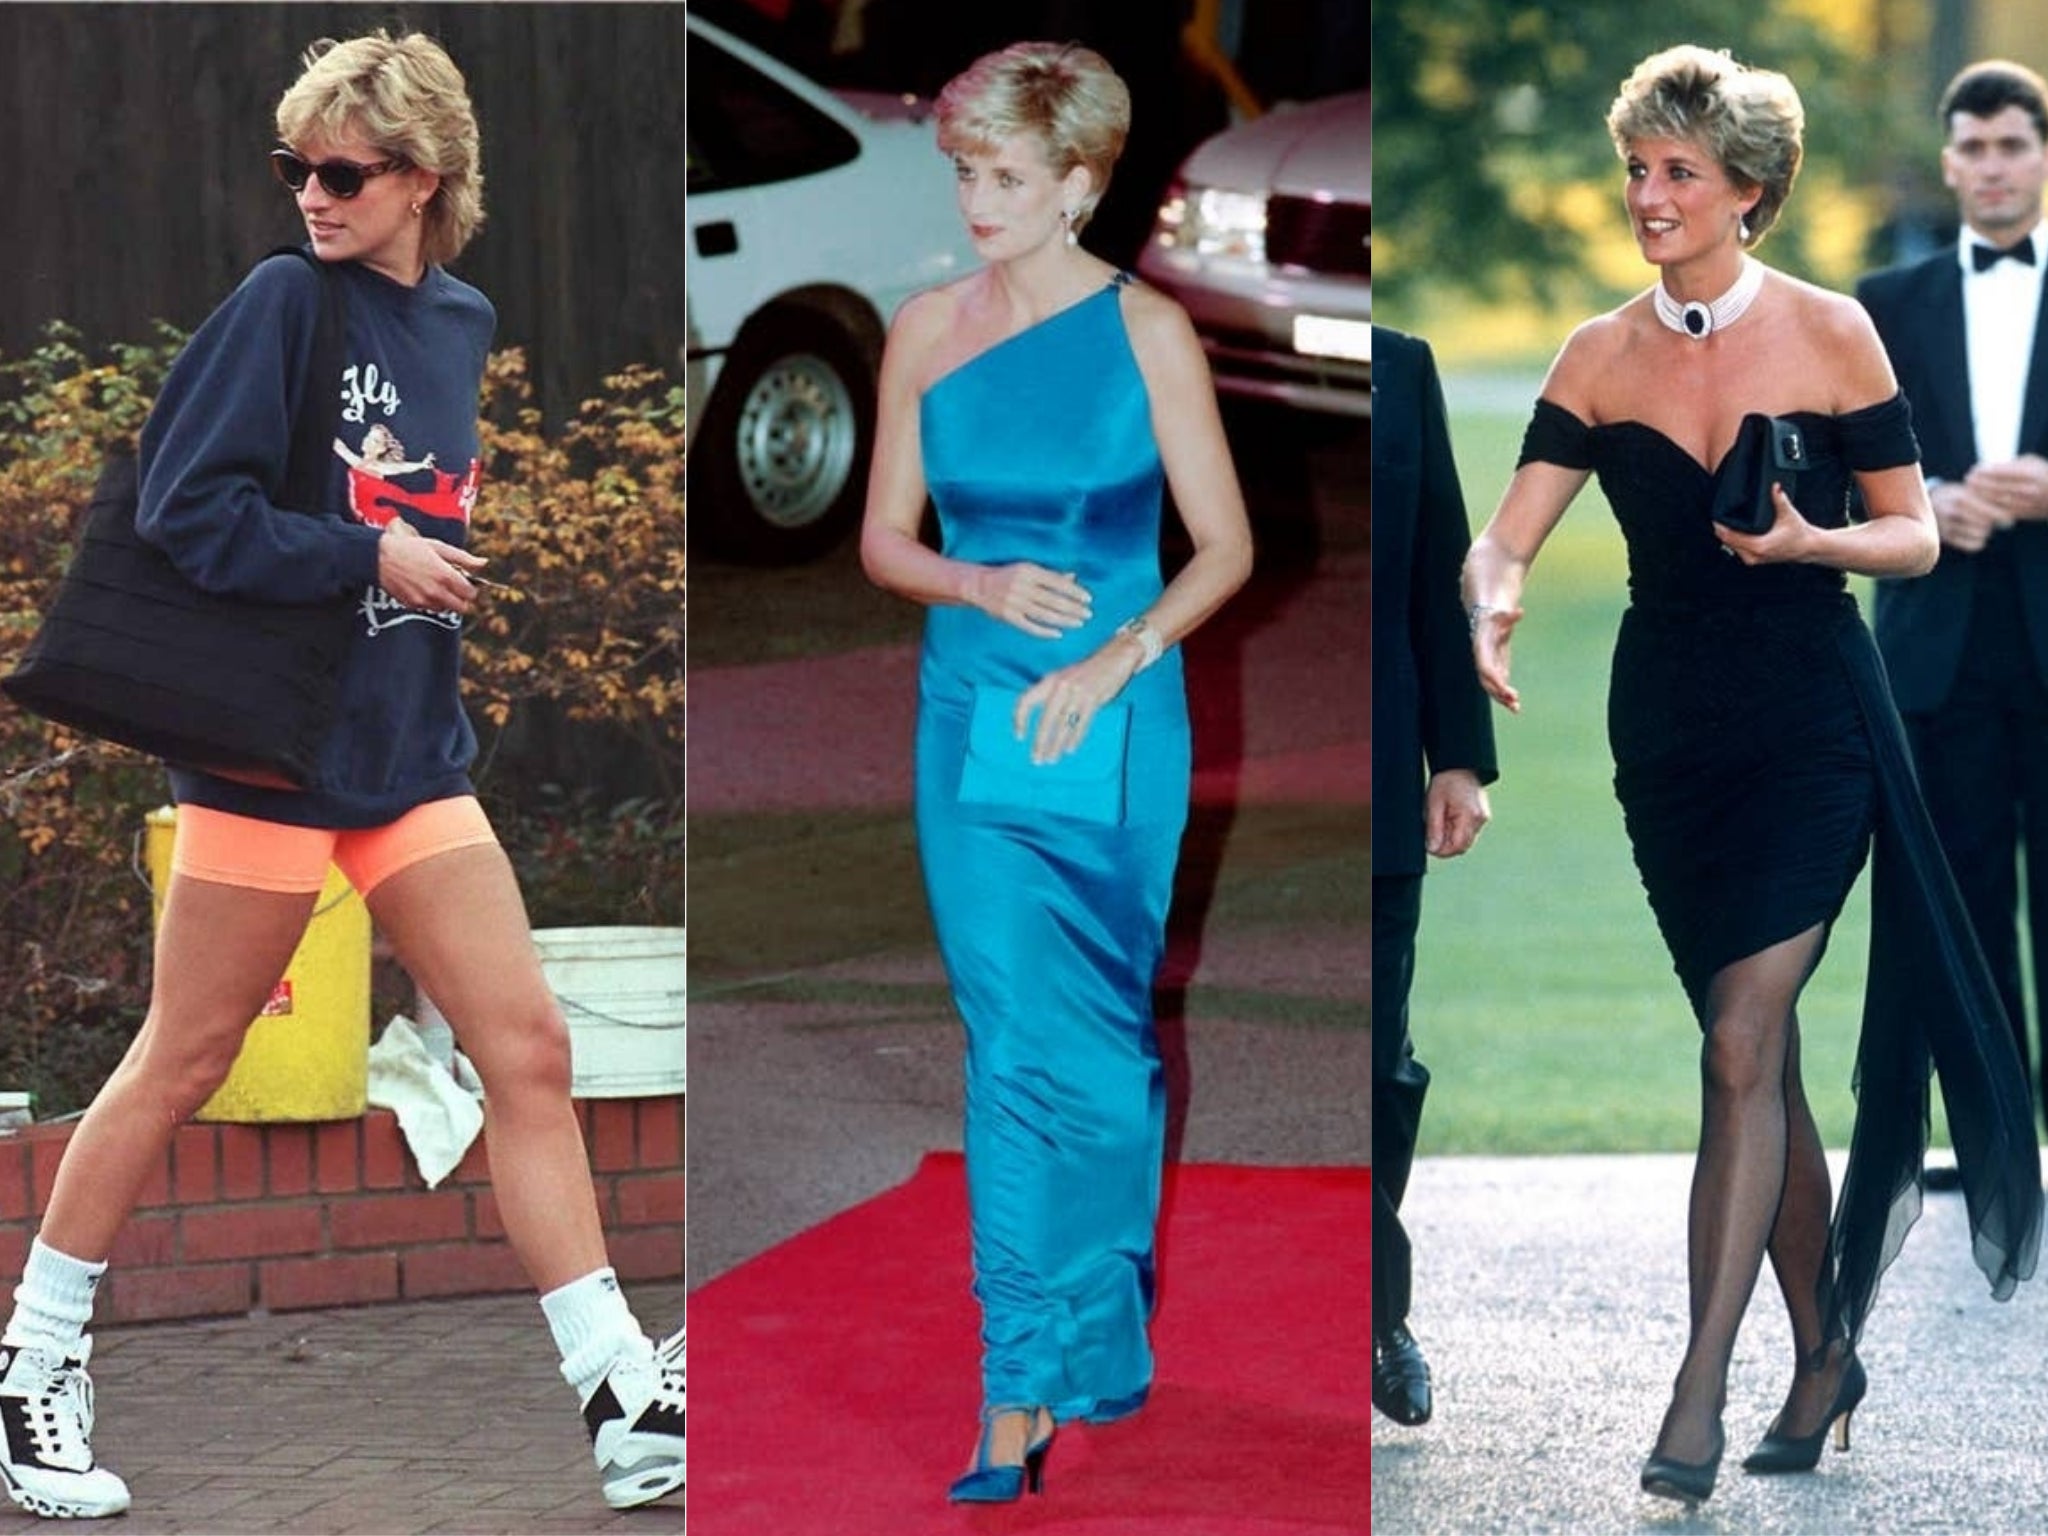 Princess Diana Most Iconic Fashion Moments On What Would Have Been Her 60th Birthday The